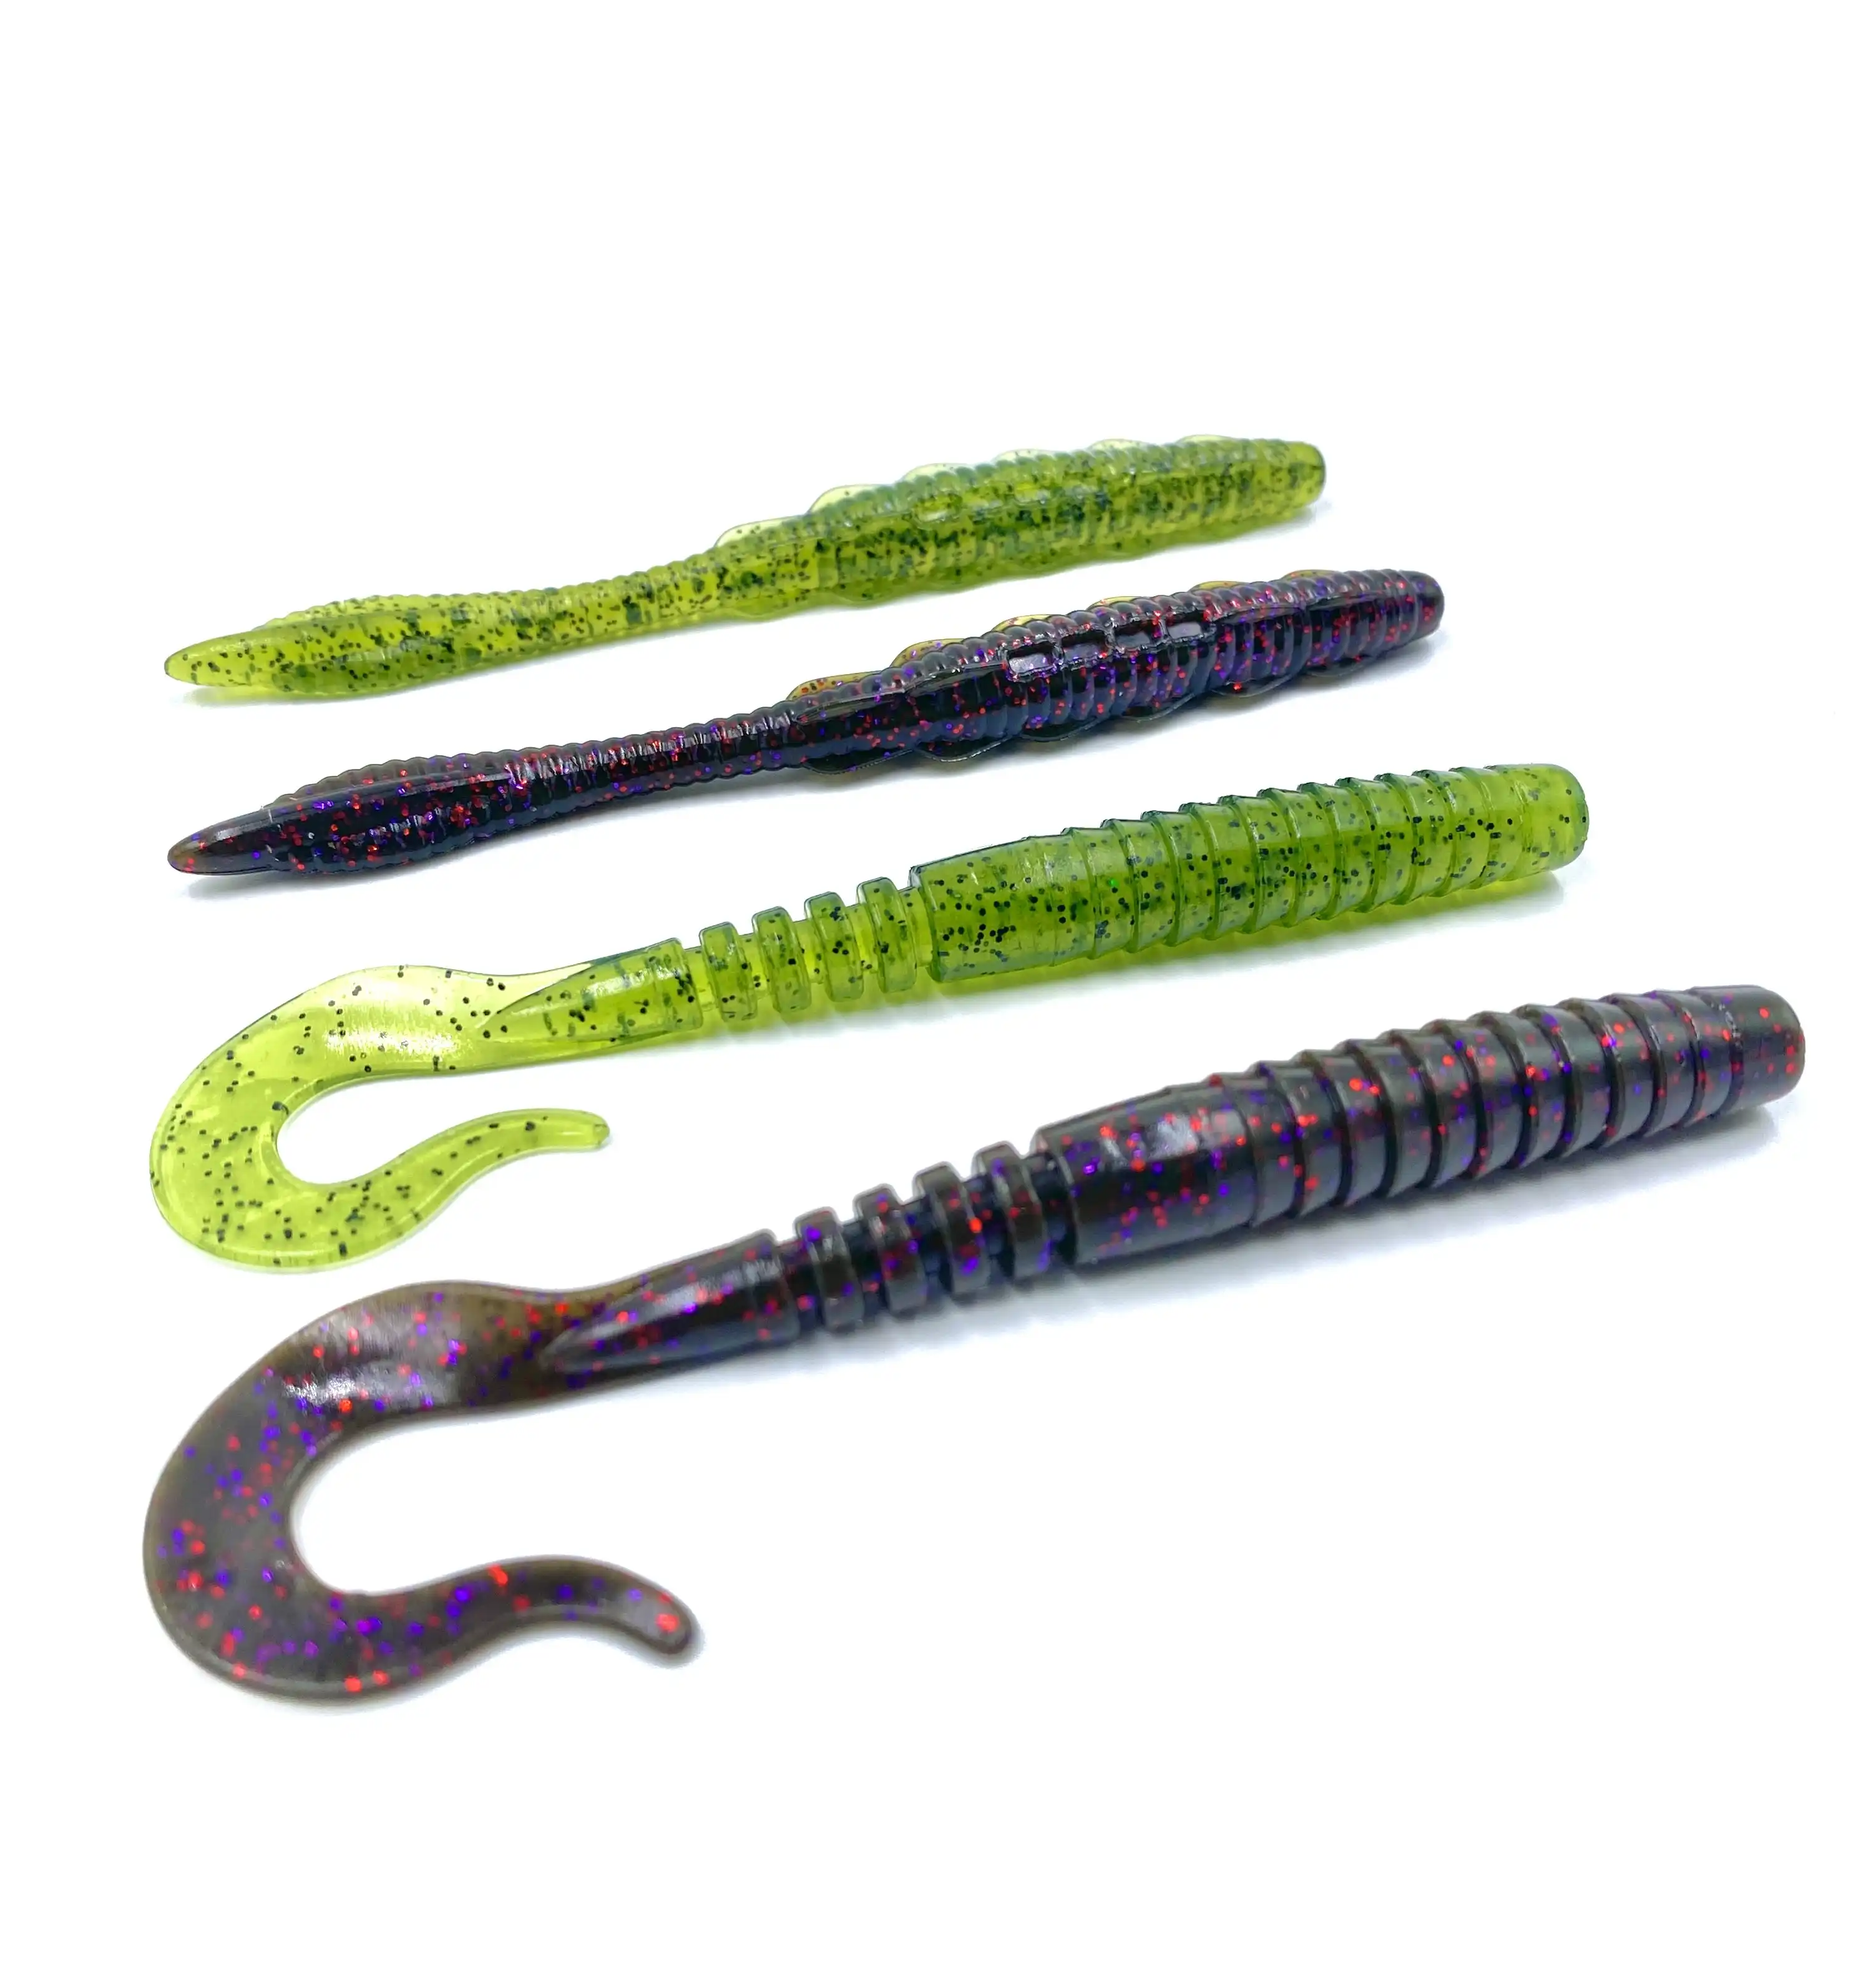 FishUp Scaly FAT & Vipo 4,3" 4,3" Mix